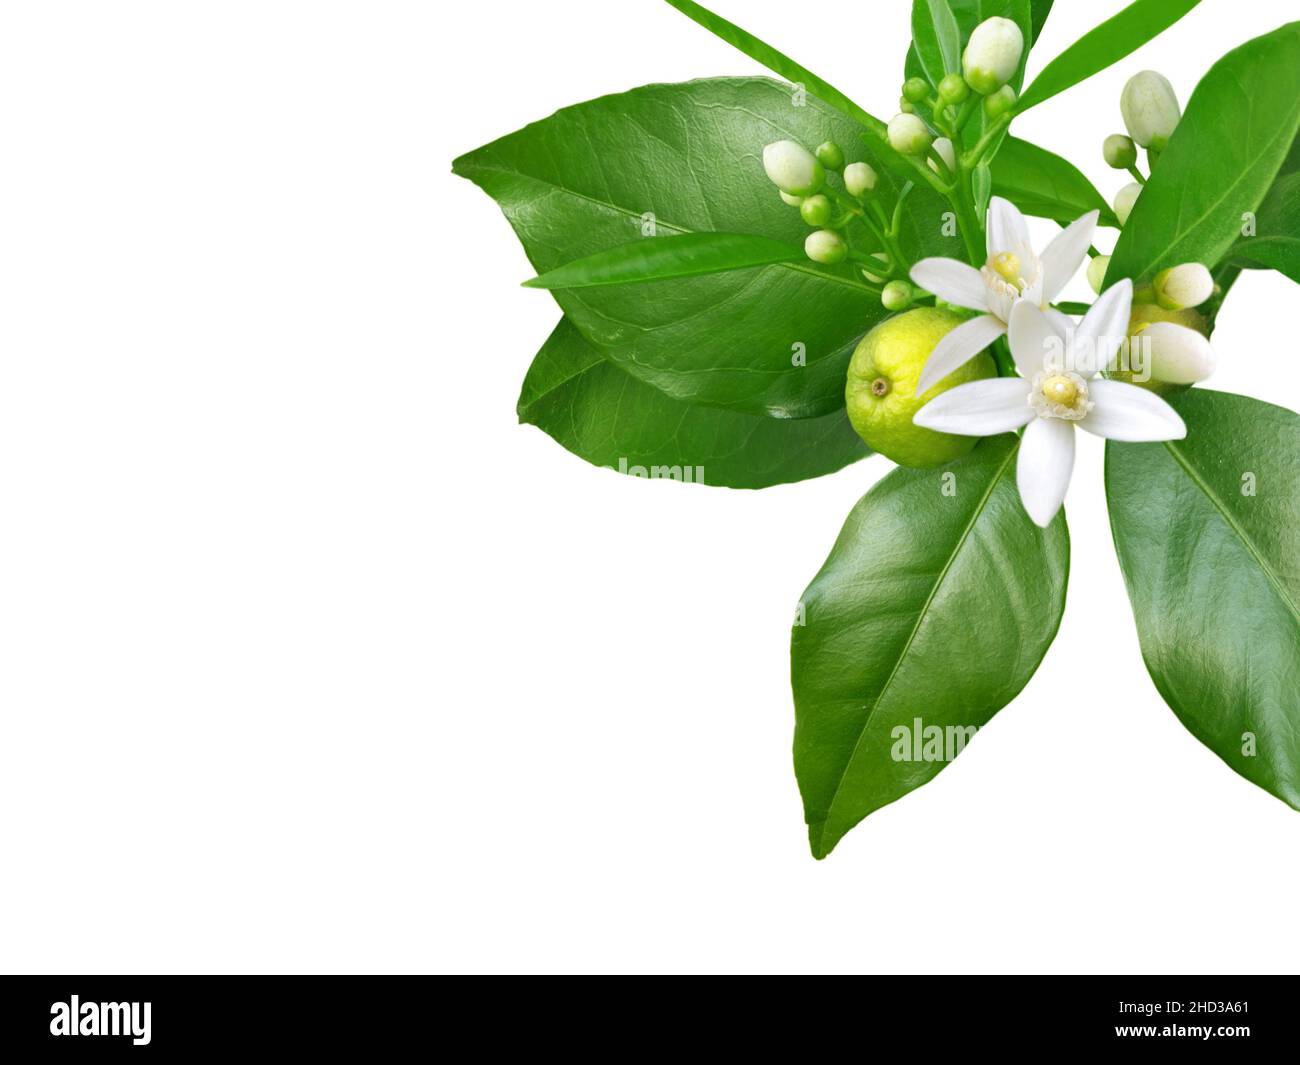 Branch of orange tree with white fragrant flowers, buds, leaves and fruit isolated on white. Neroli blossom corner. Stock Photo